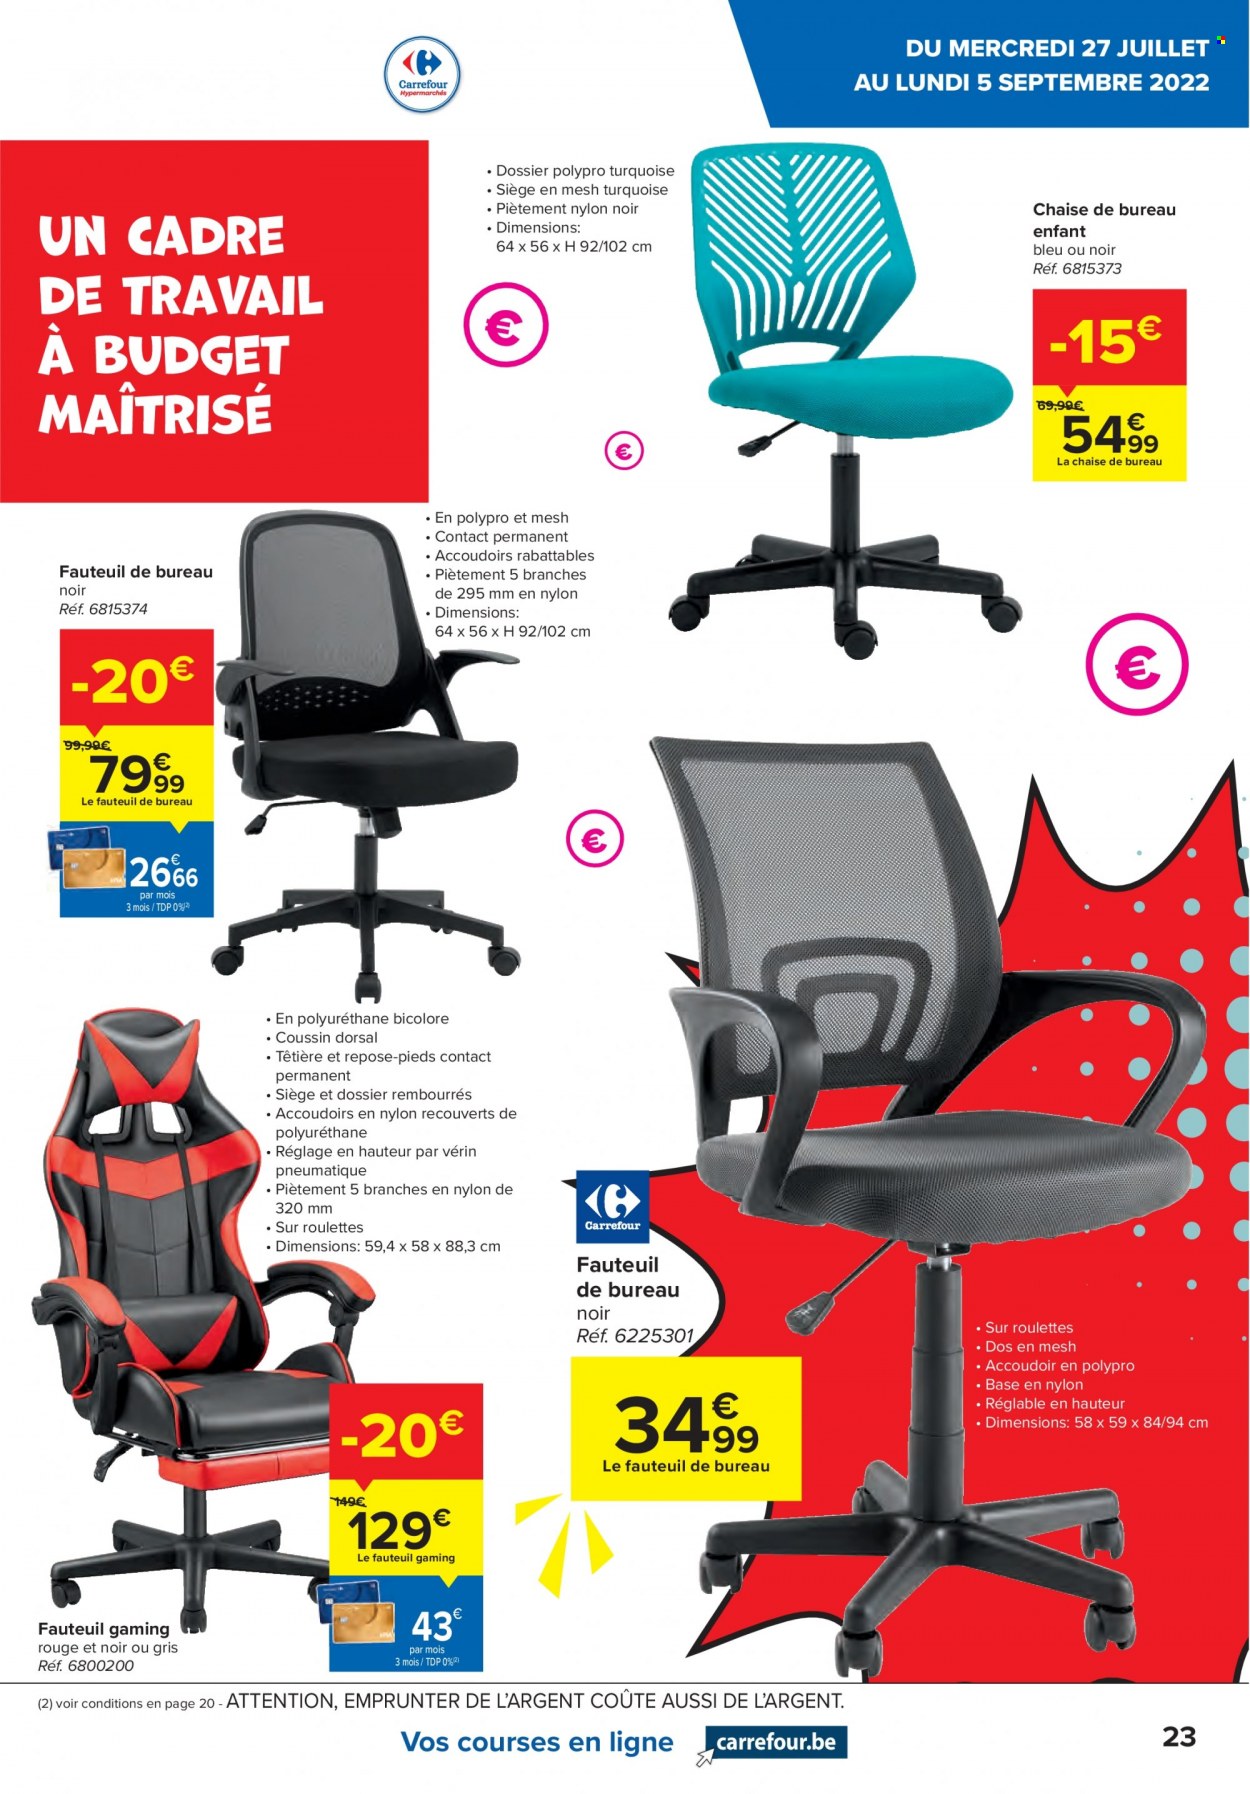 Catalogue Carrefour hypermarkt - 27.7.2022 - 5.9.2022. Page 23.